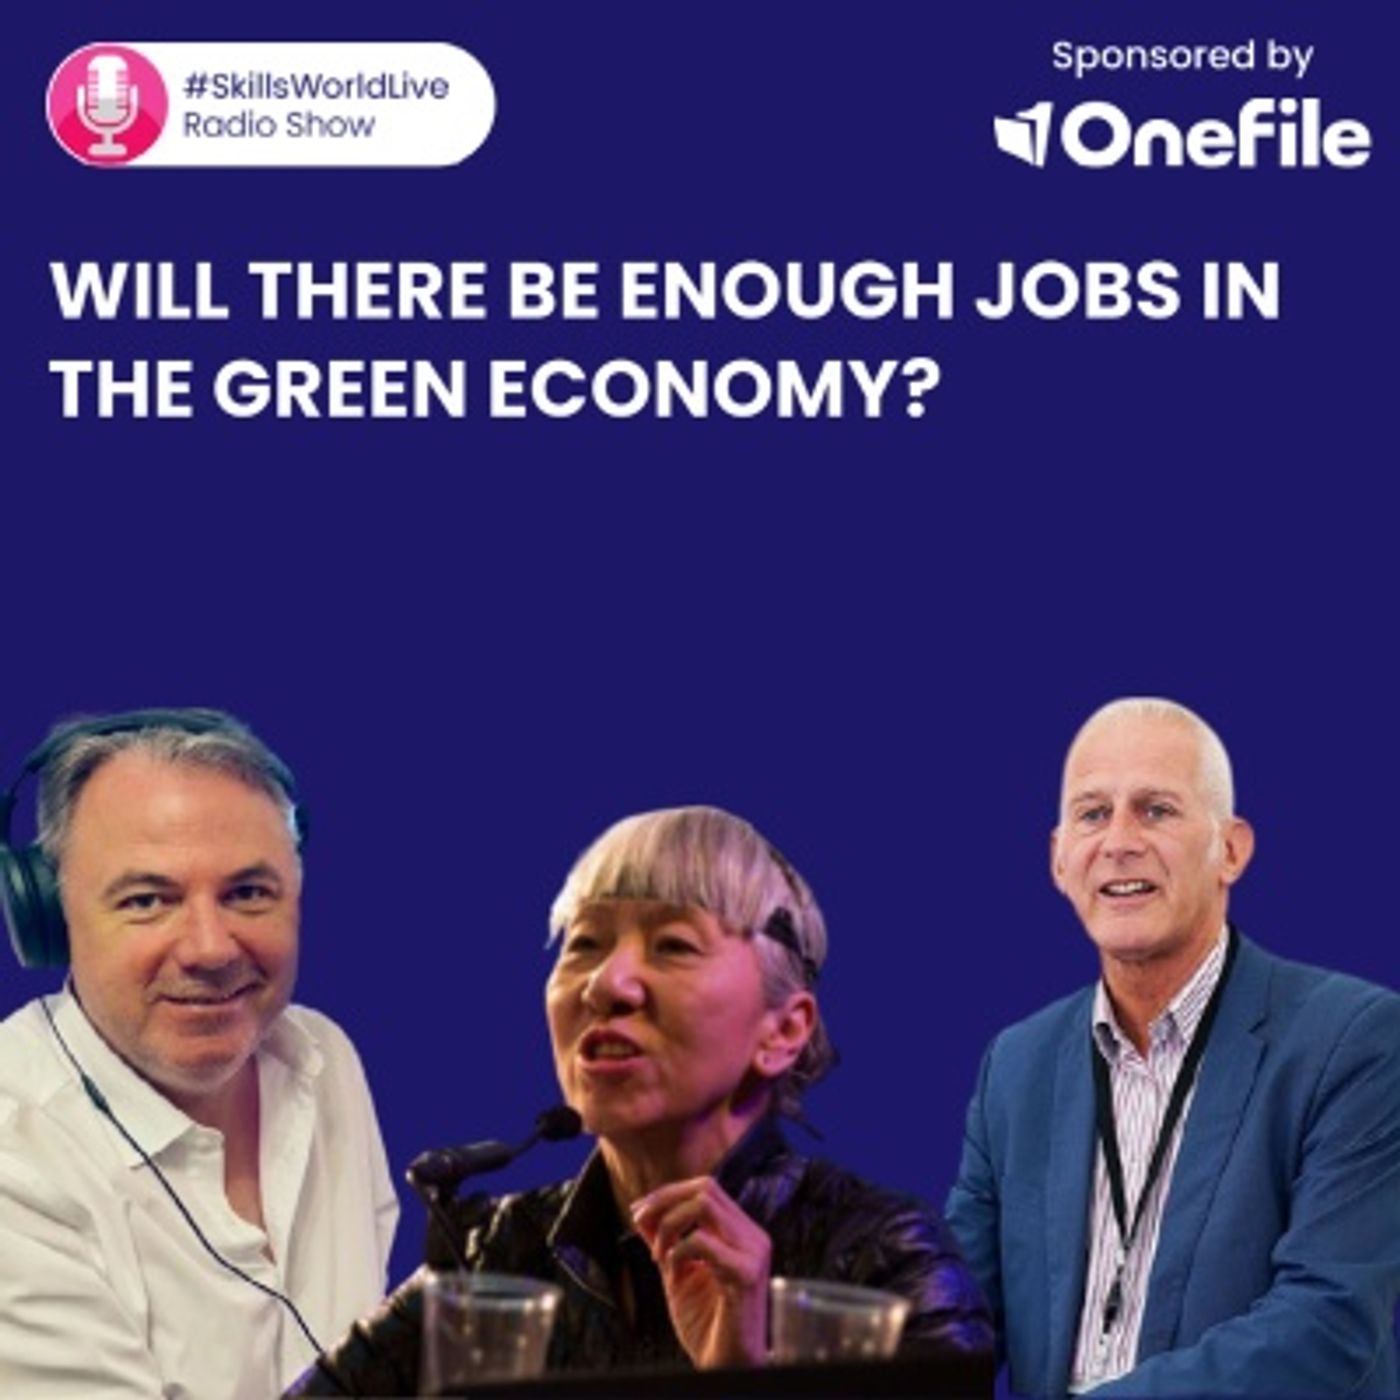 Will there be enough jobs in the green economy? #SkillsWorldLive 3.11